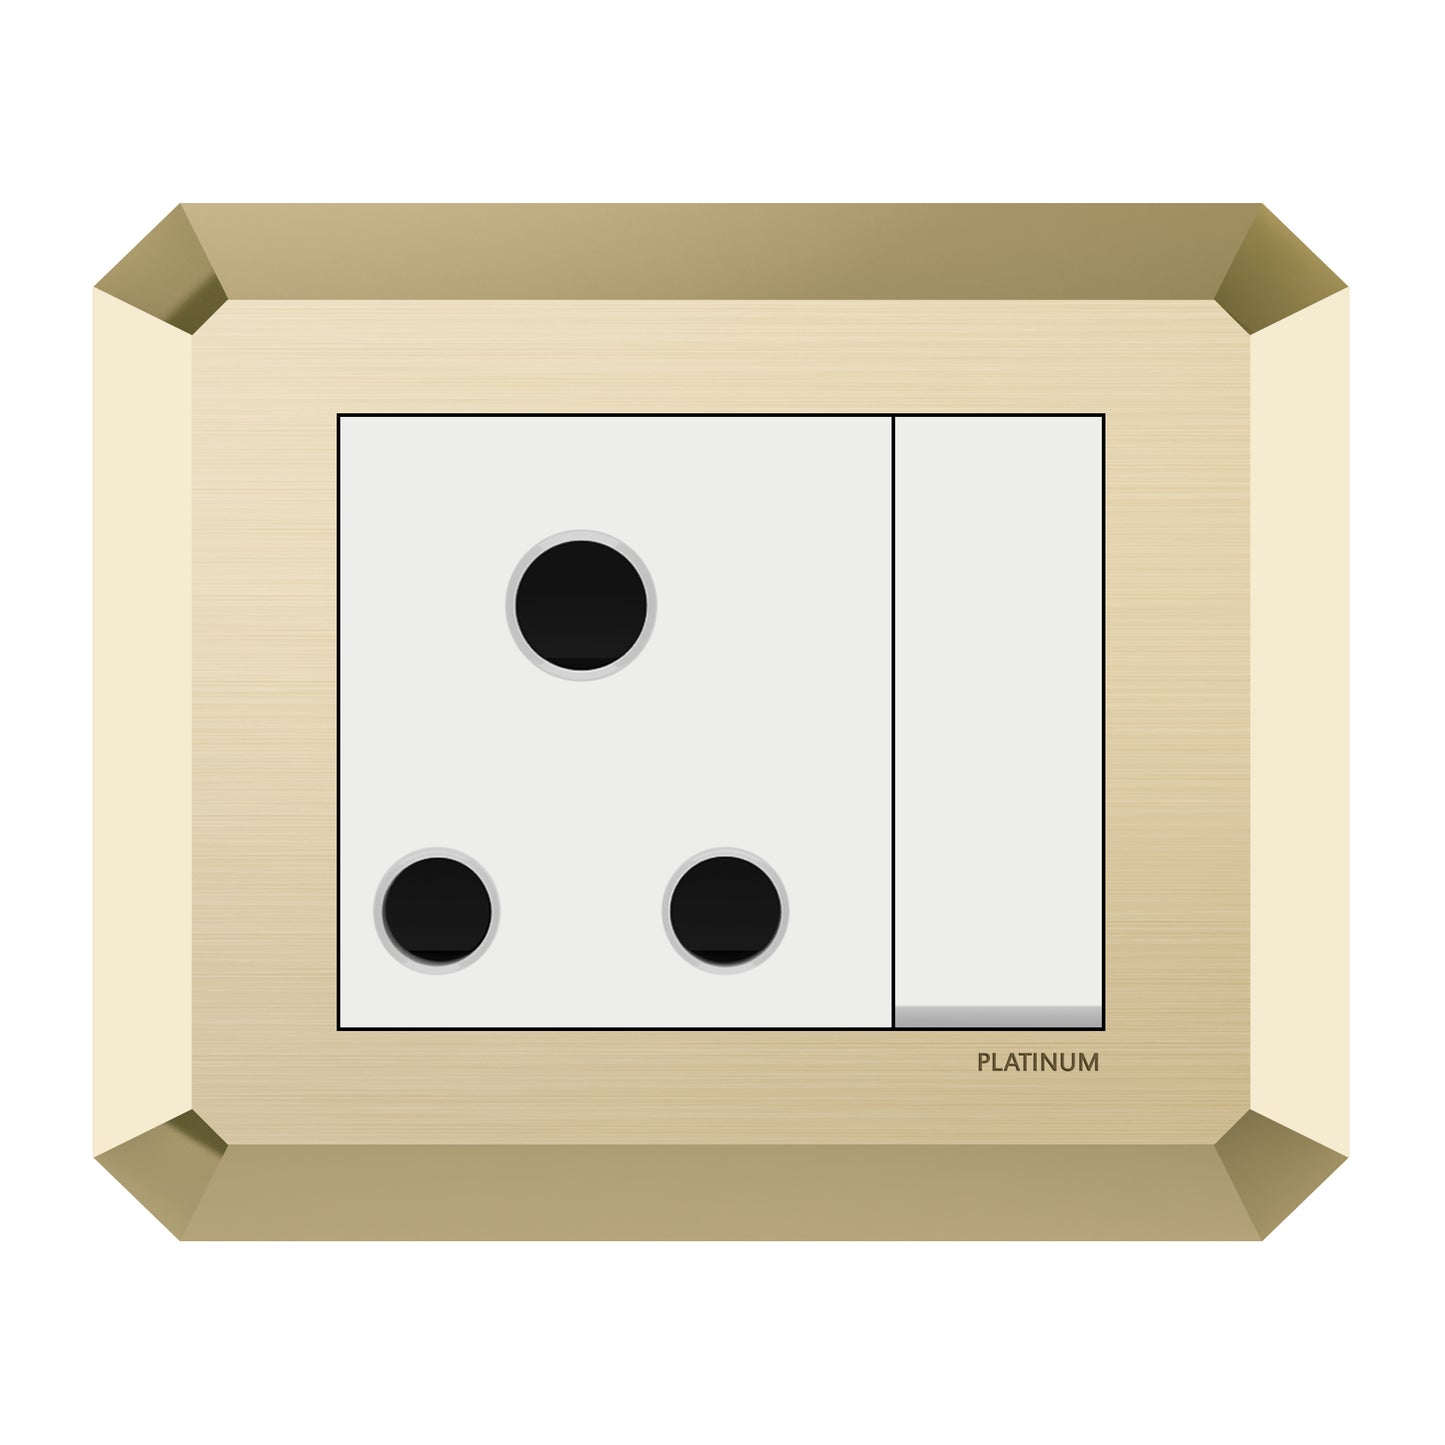 16A 3 pin Round Switched Socket Outlet (Platinum Electrical Wiring Devices)